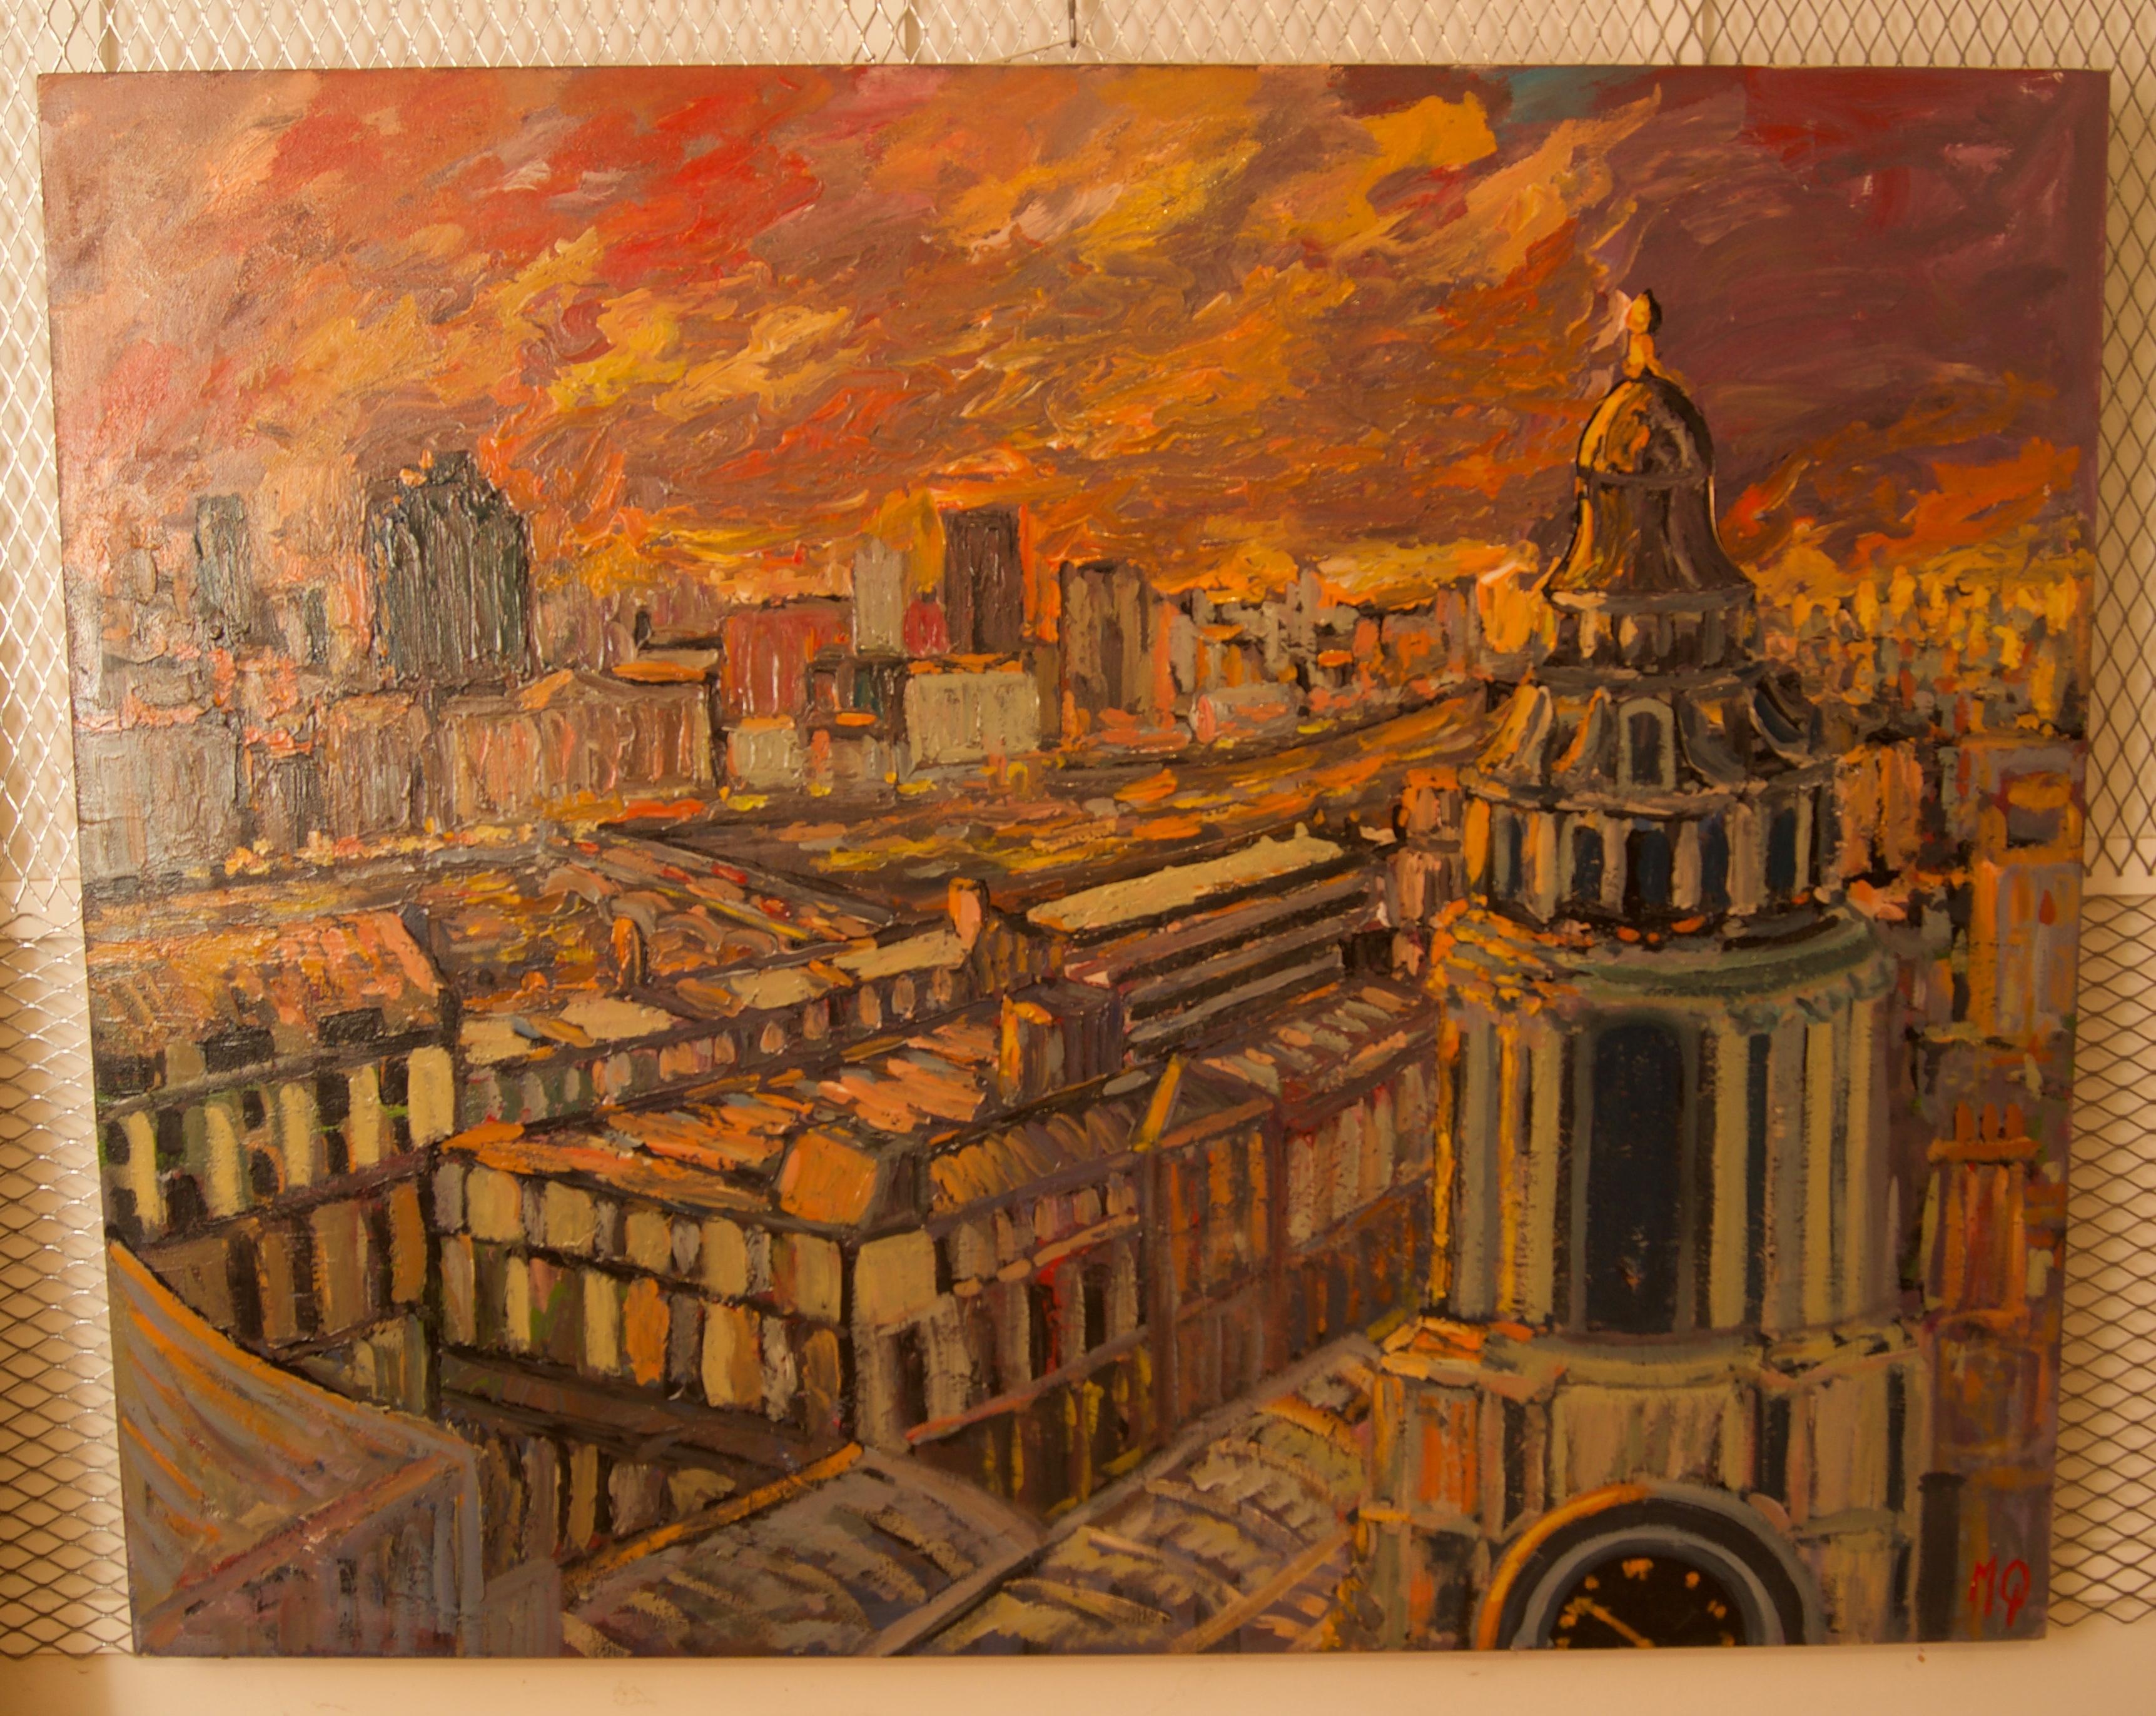 Sunset over London - Late 20th Century Impressionist Acrylic Landscape - Quirke - Painting by Michael Quirke